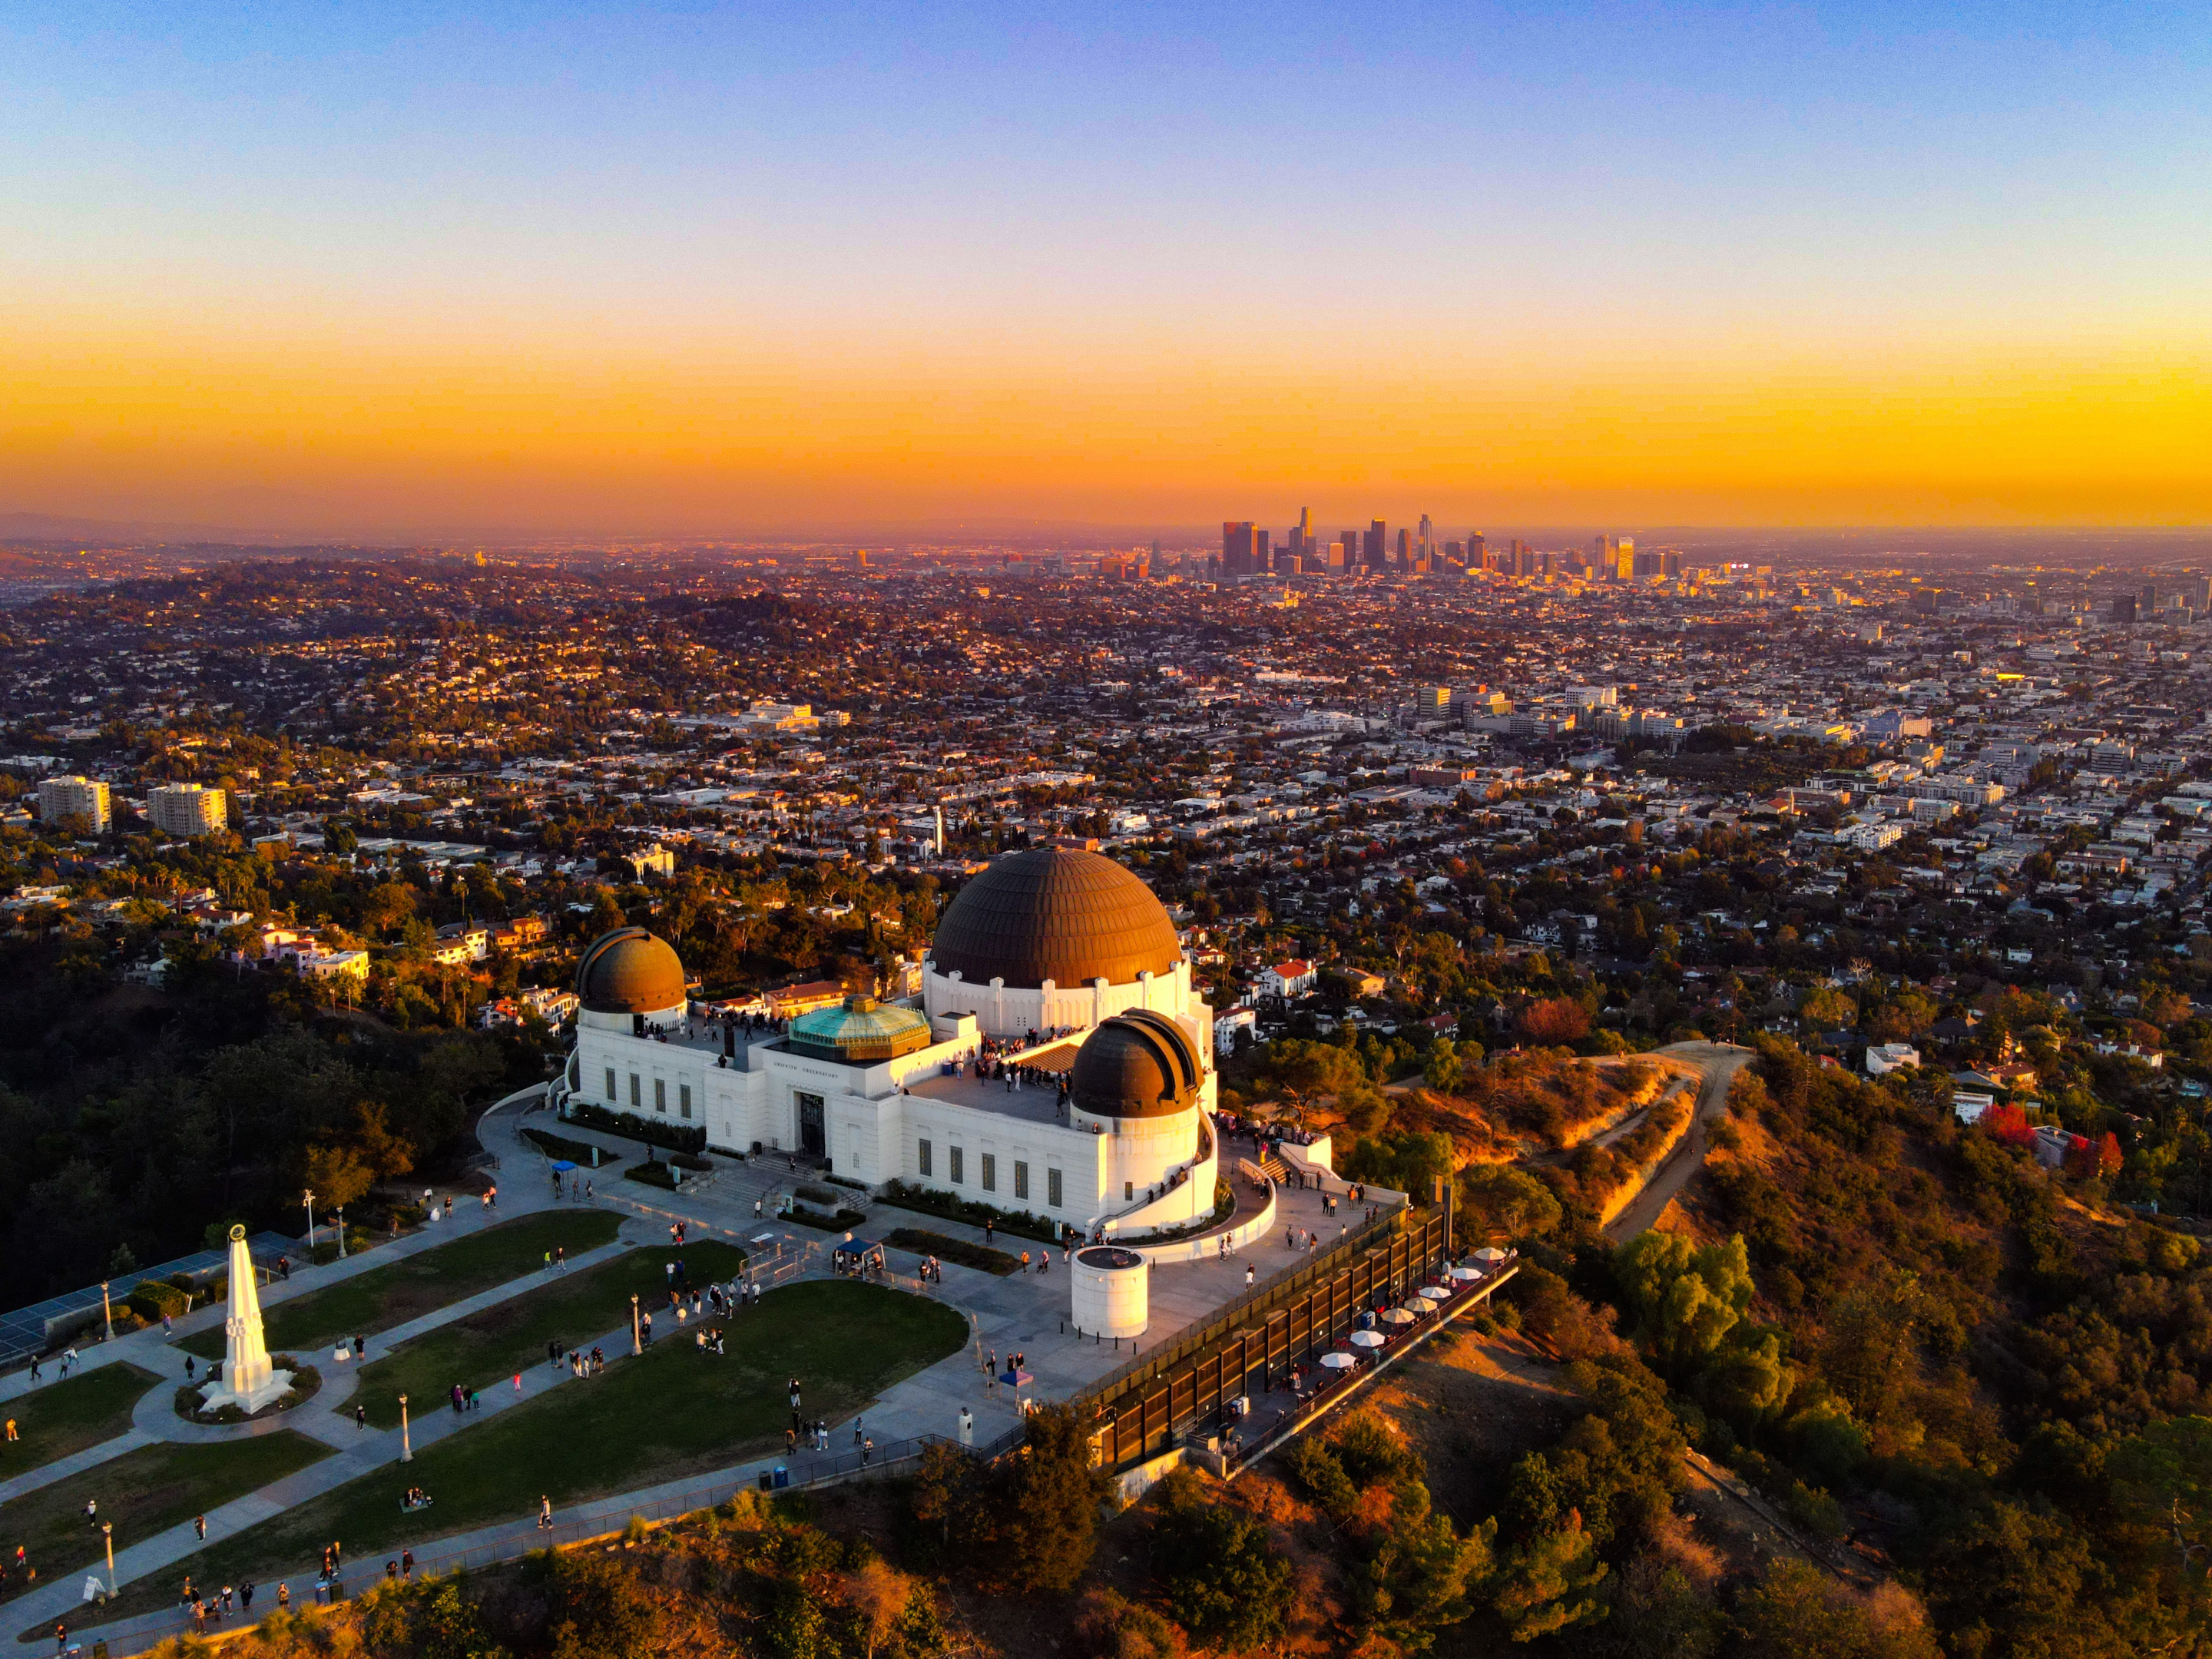 Aerial view of the Griffith Observatory in Los Angeles. Photo by Nils